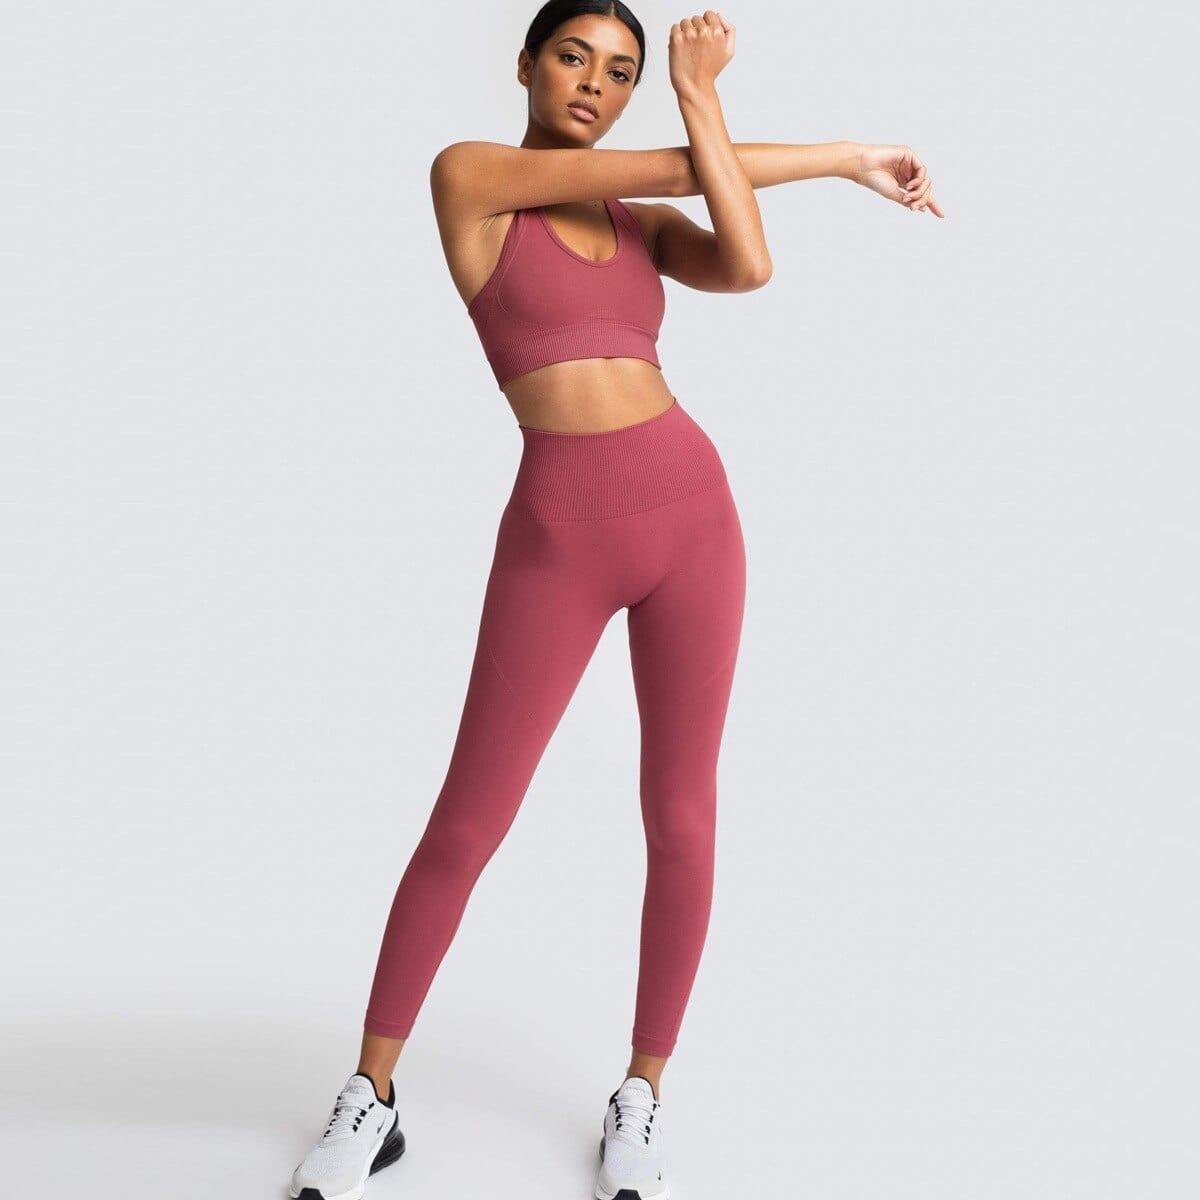 Shop 0 bean suit / S Two Piece Set Women Sportswear Workout Clothes for Women Sport Sets Suits For Fitness Long Sleeve Seamless Yoga Set Leggings Mademoiselle Home Decor